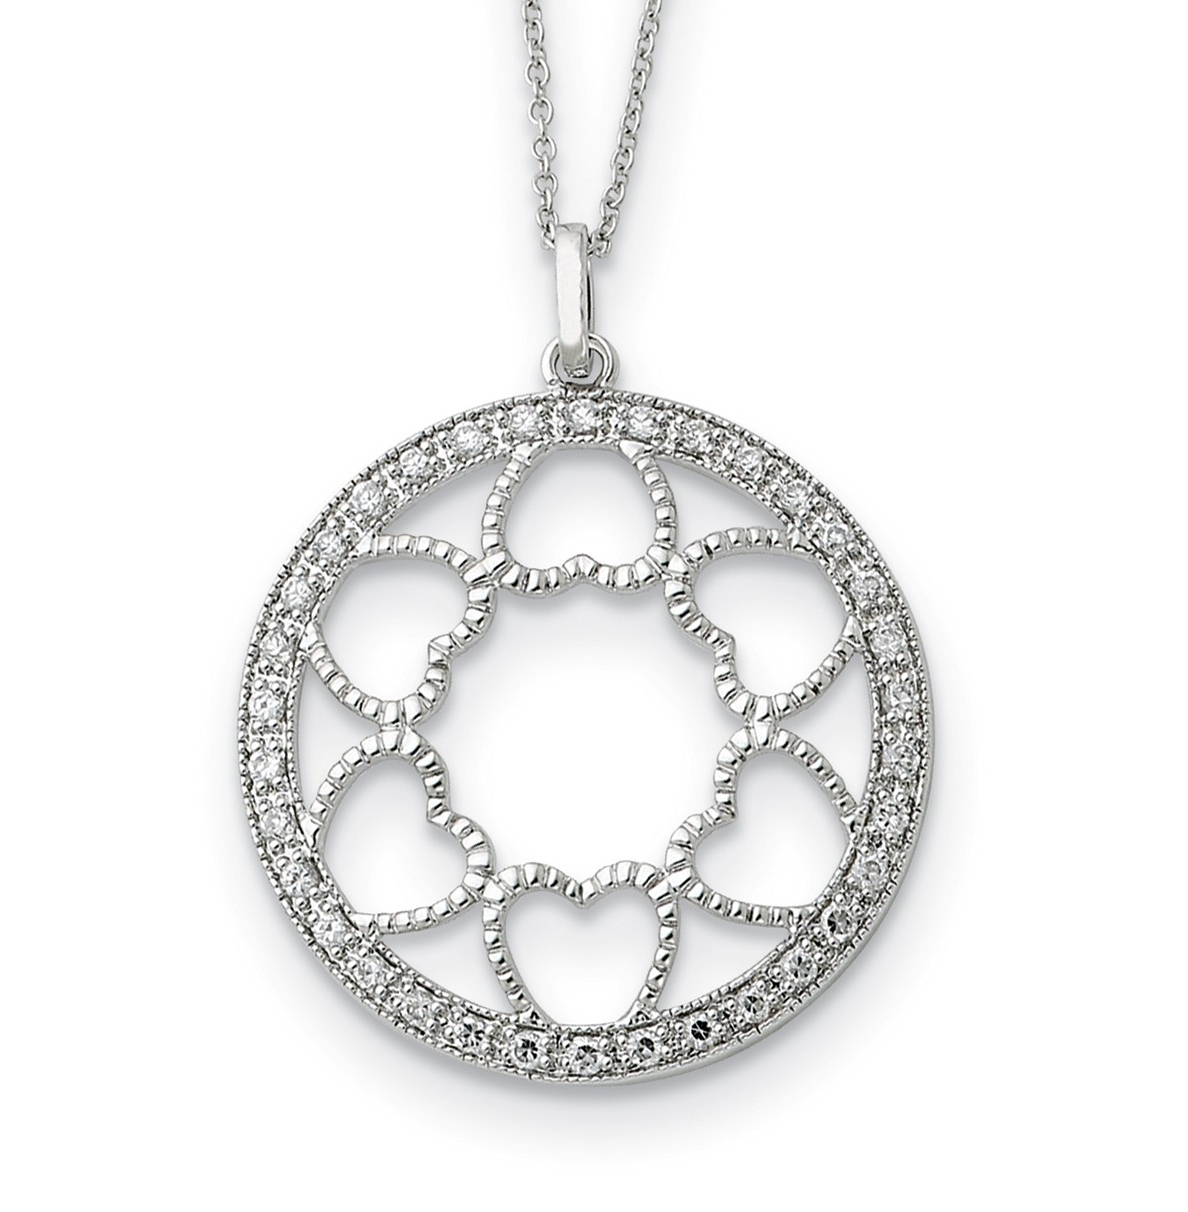 'Fullness of Blessings' CZ Pendant Necklace, Rhodium-Plated Sterling Silver, 18